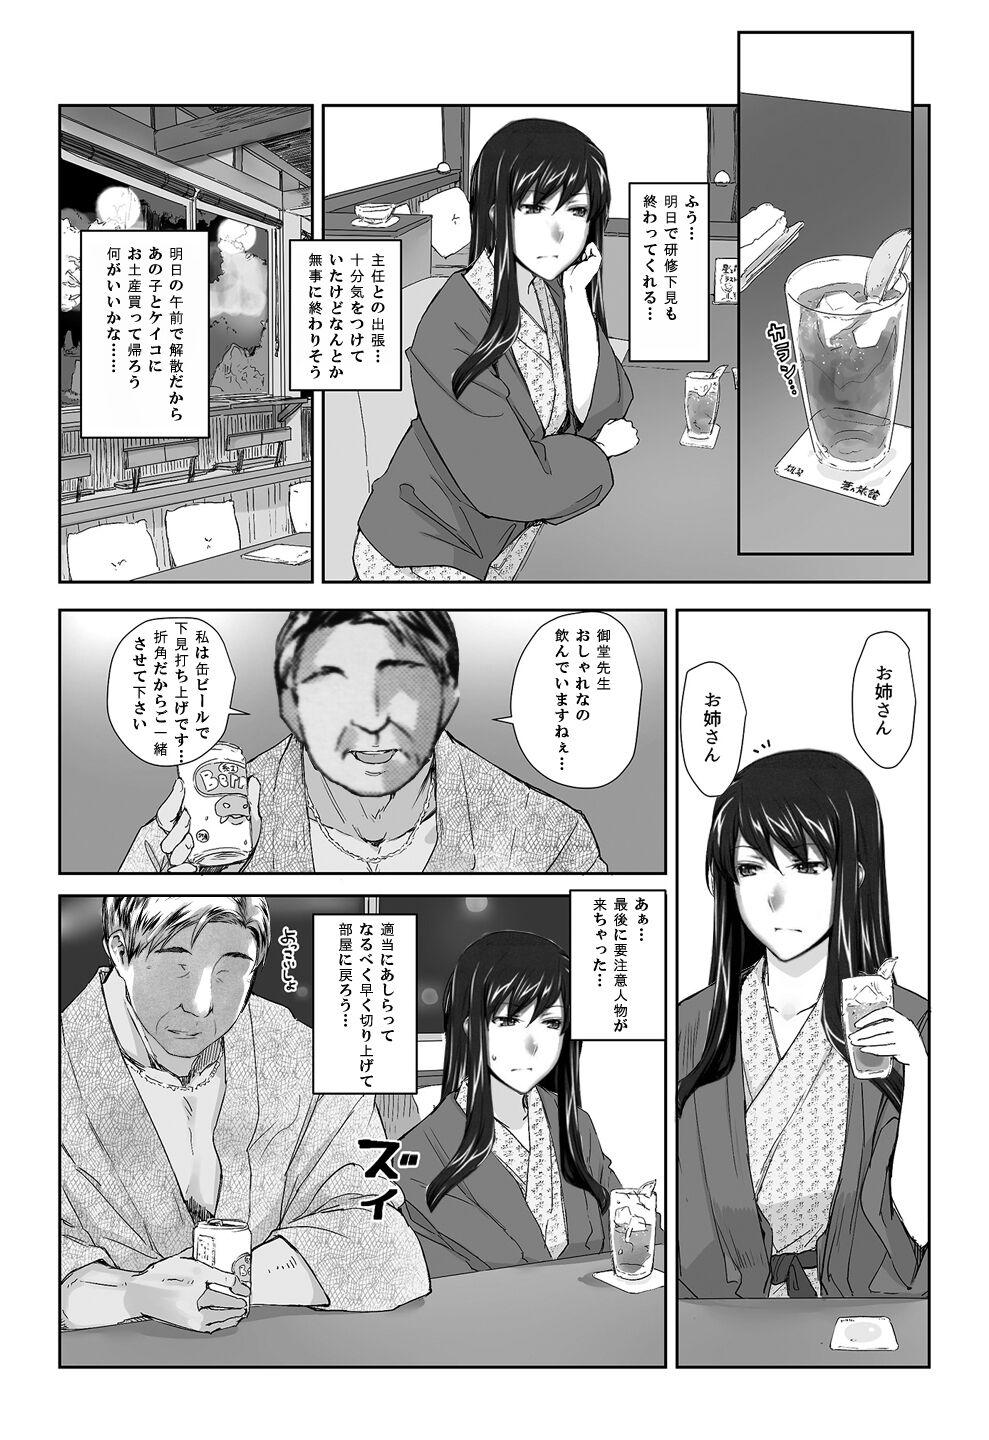 Gaygroupsex Sakiko-san in delusion Vol.8 revised ~Sakiko-san's circumstance at an educational training Route3~ (collage) (Continue to “First day of study trip” (page 42) of Vol.1) Gay Brownhair - Picture 3